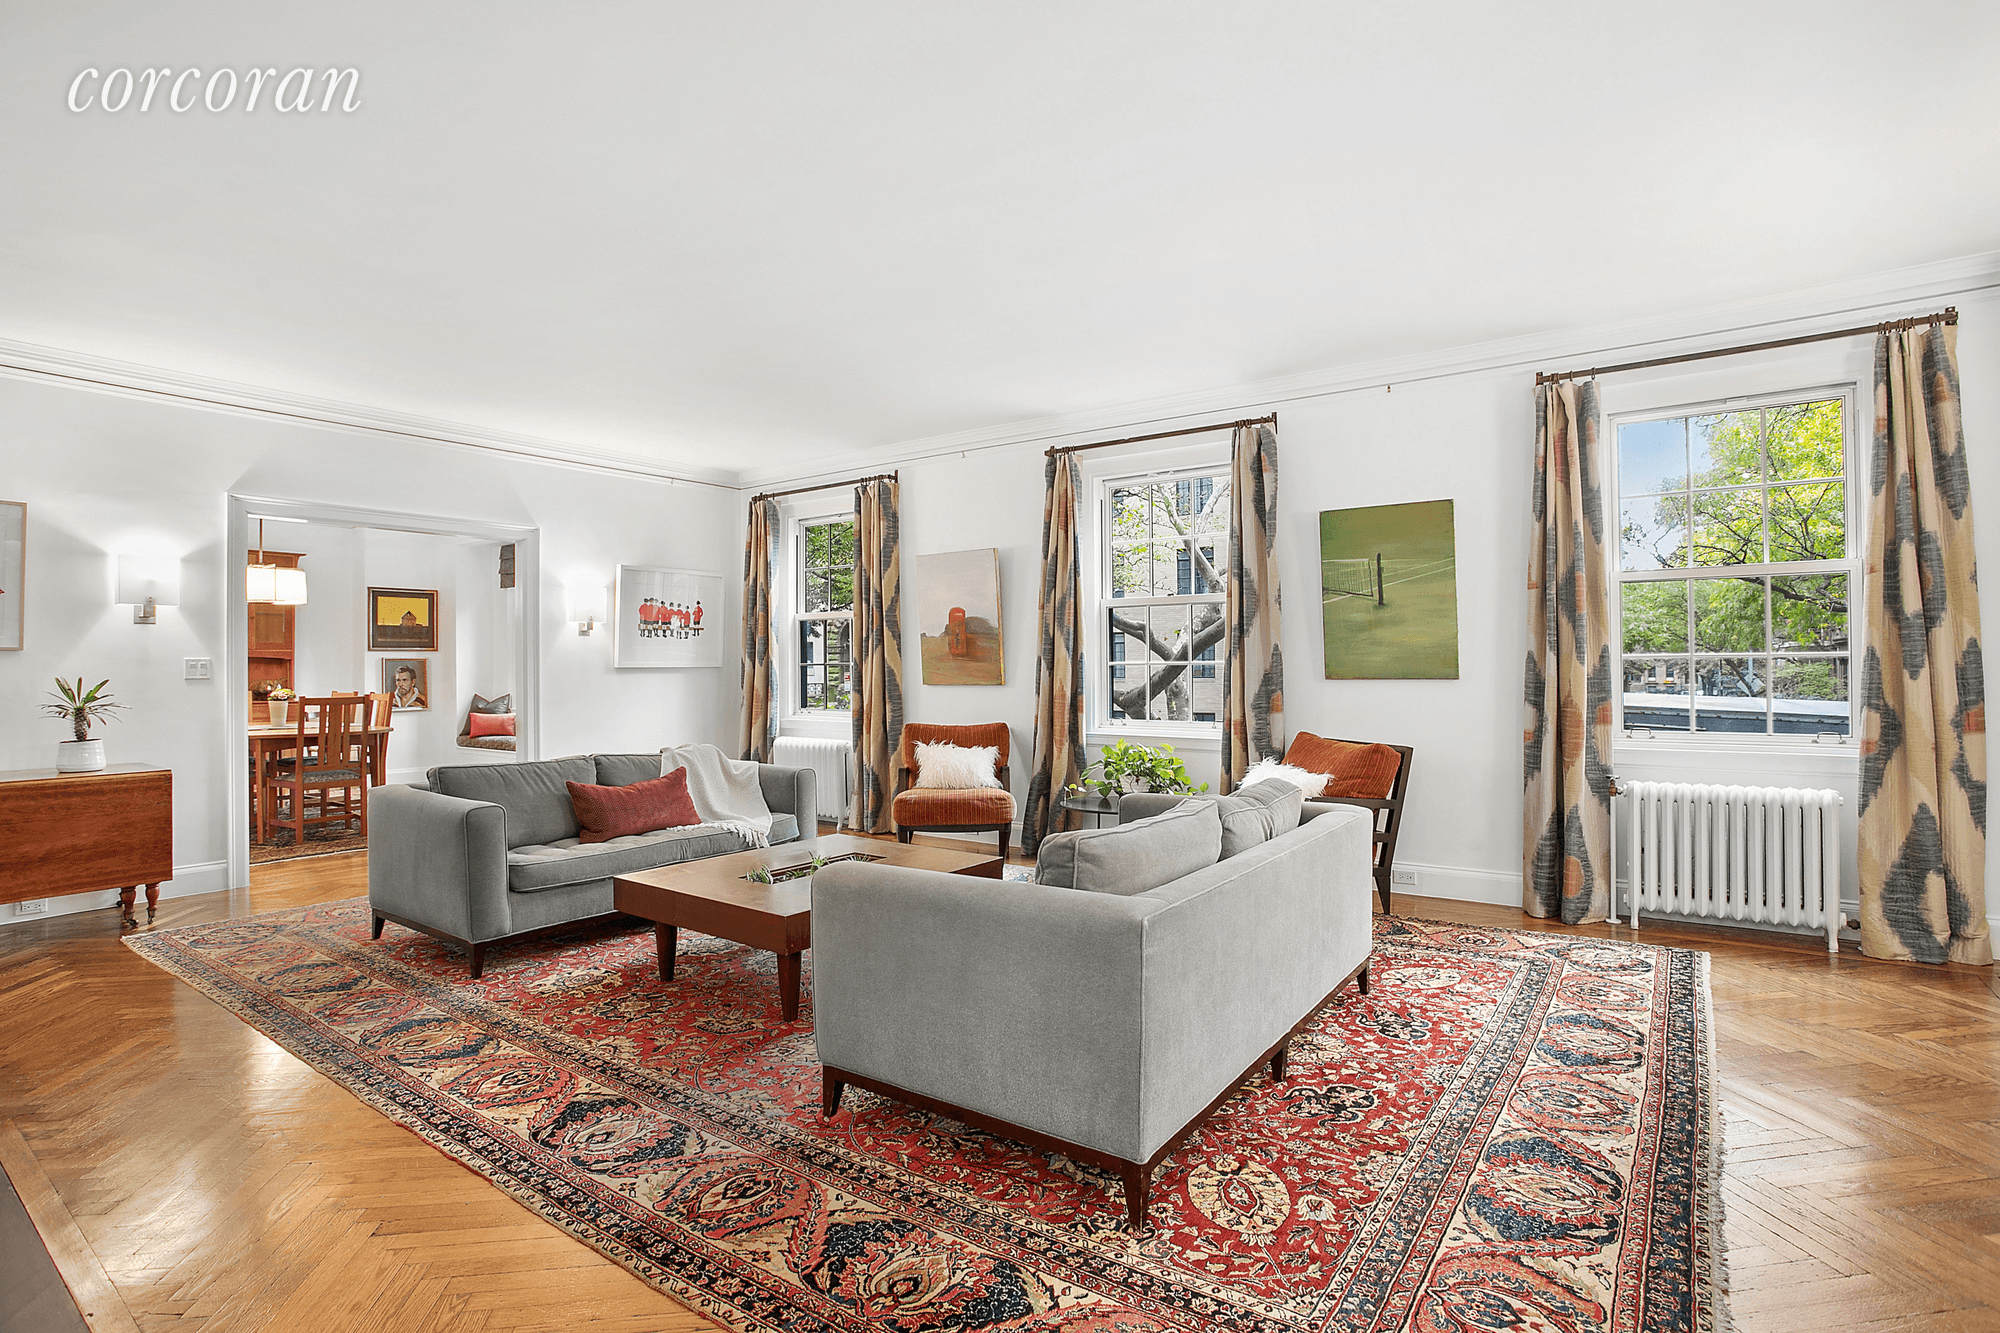 A rare 4 bedroom home in the coveted southwest corner of 1 Pierrepont Street in Brooklyn Heights offering gracious entertaining rooms all flowing from a large welcoming entrance gallery.